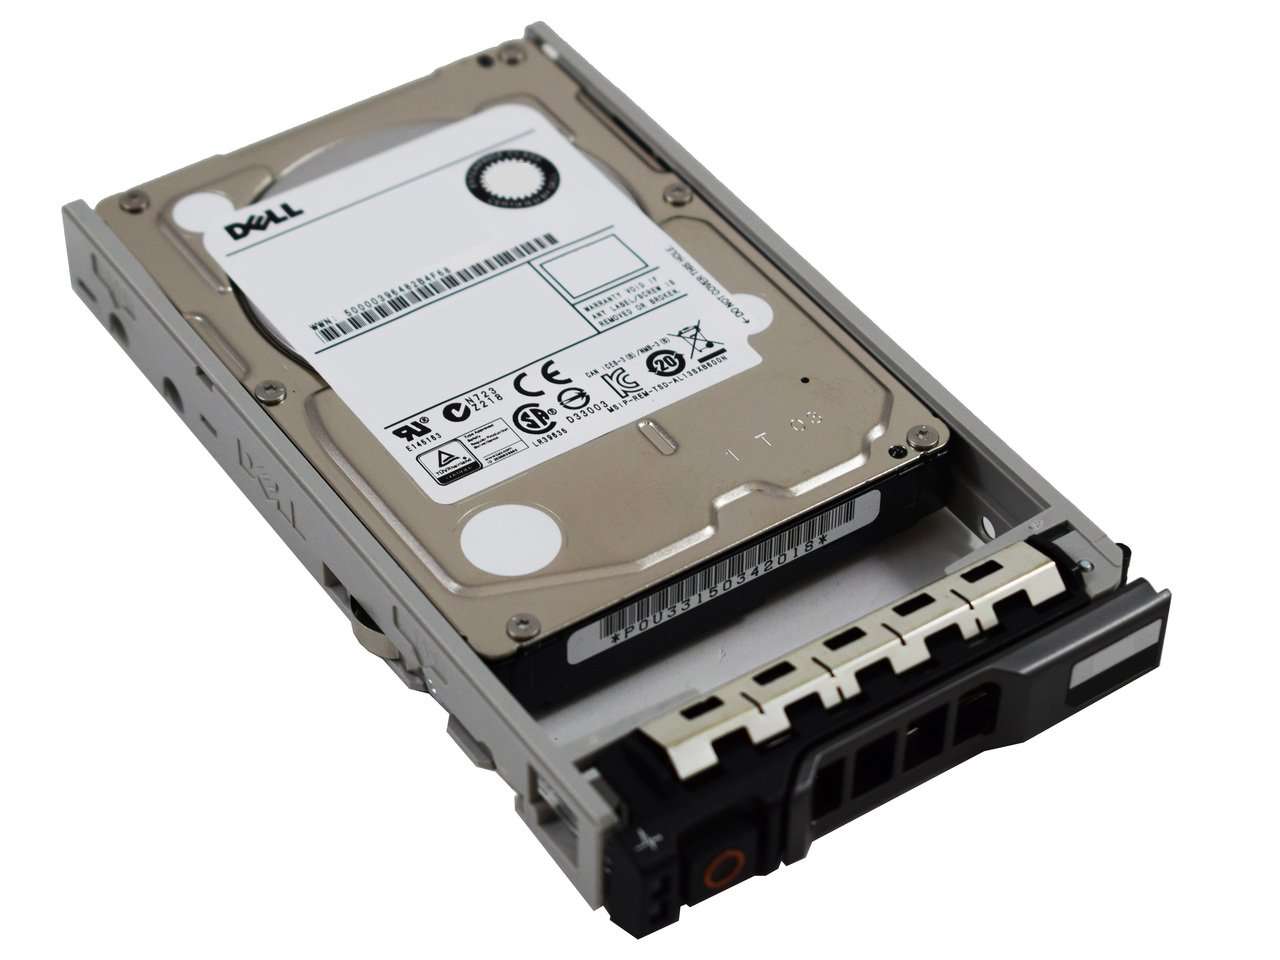 Dell G13 HGJHG 600GB 10K RPM SAS 6Gb/s 512n 2.5" Manufacturer Recertified HDD